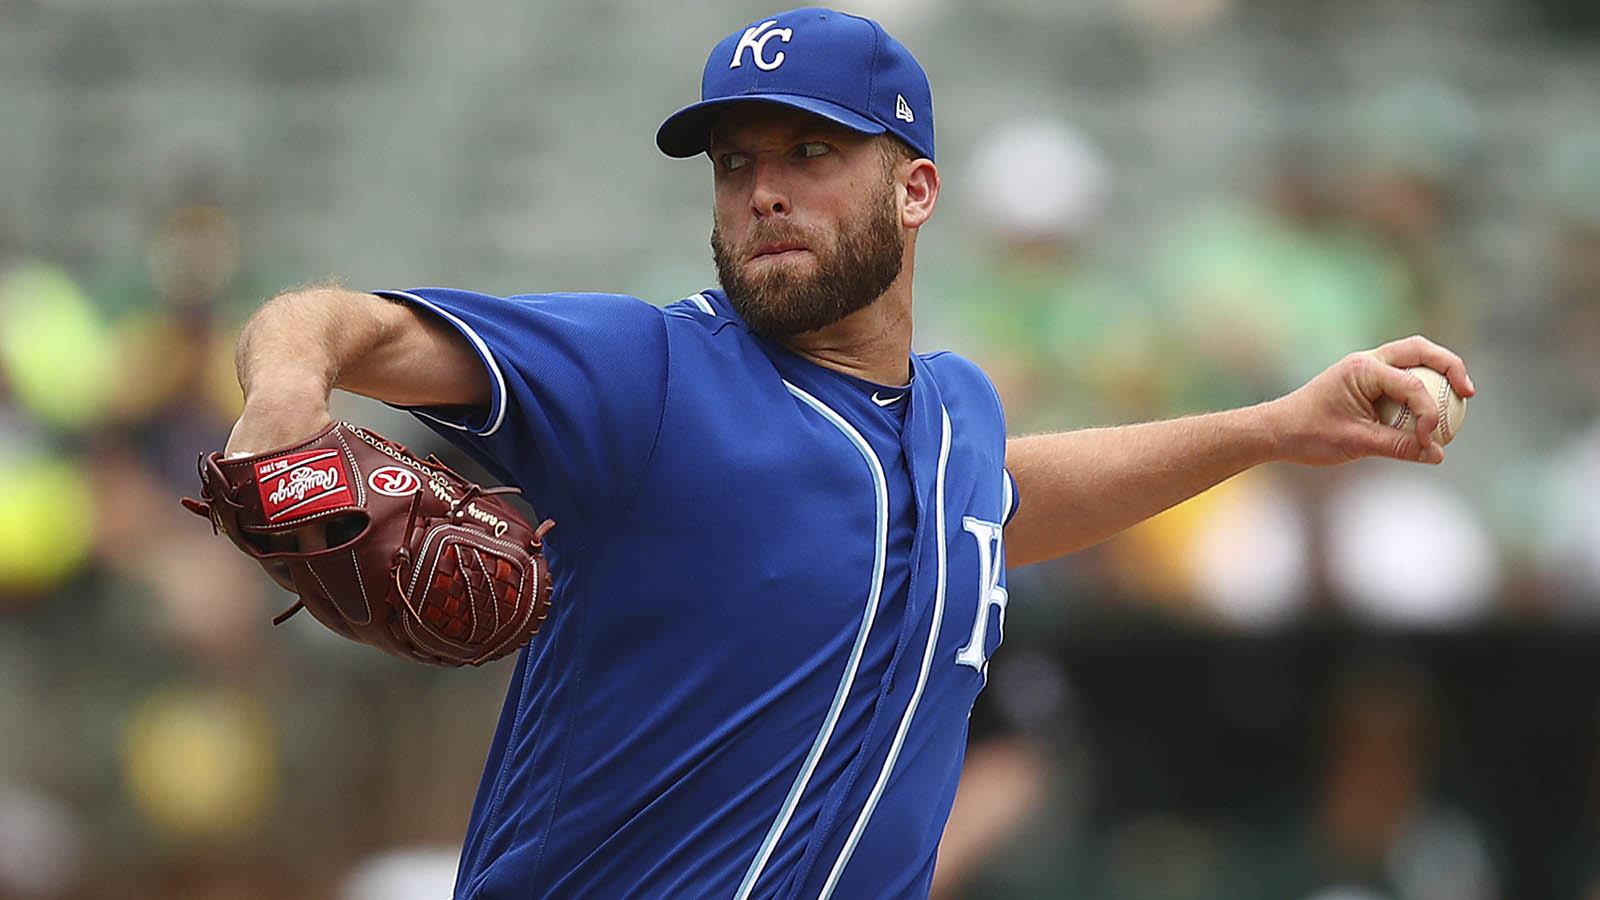 Duffy dominates in Royals' 2-0 win over Athletics